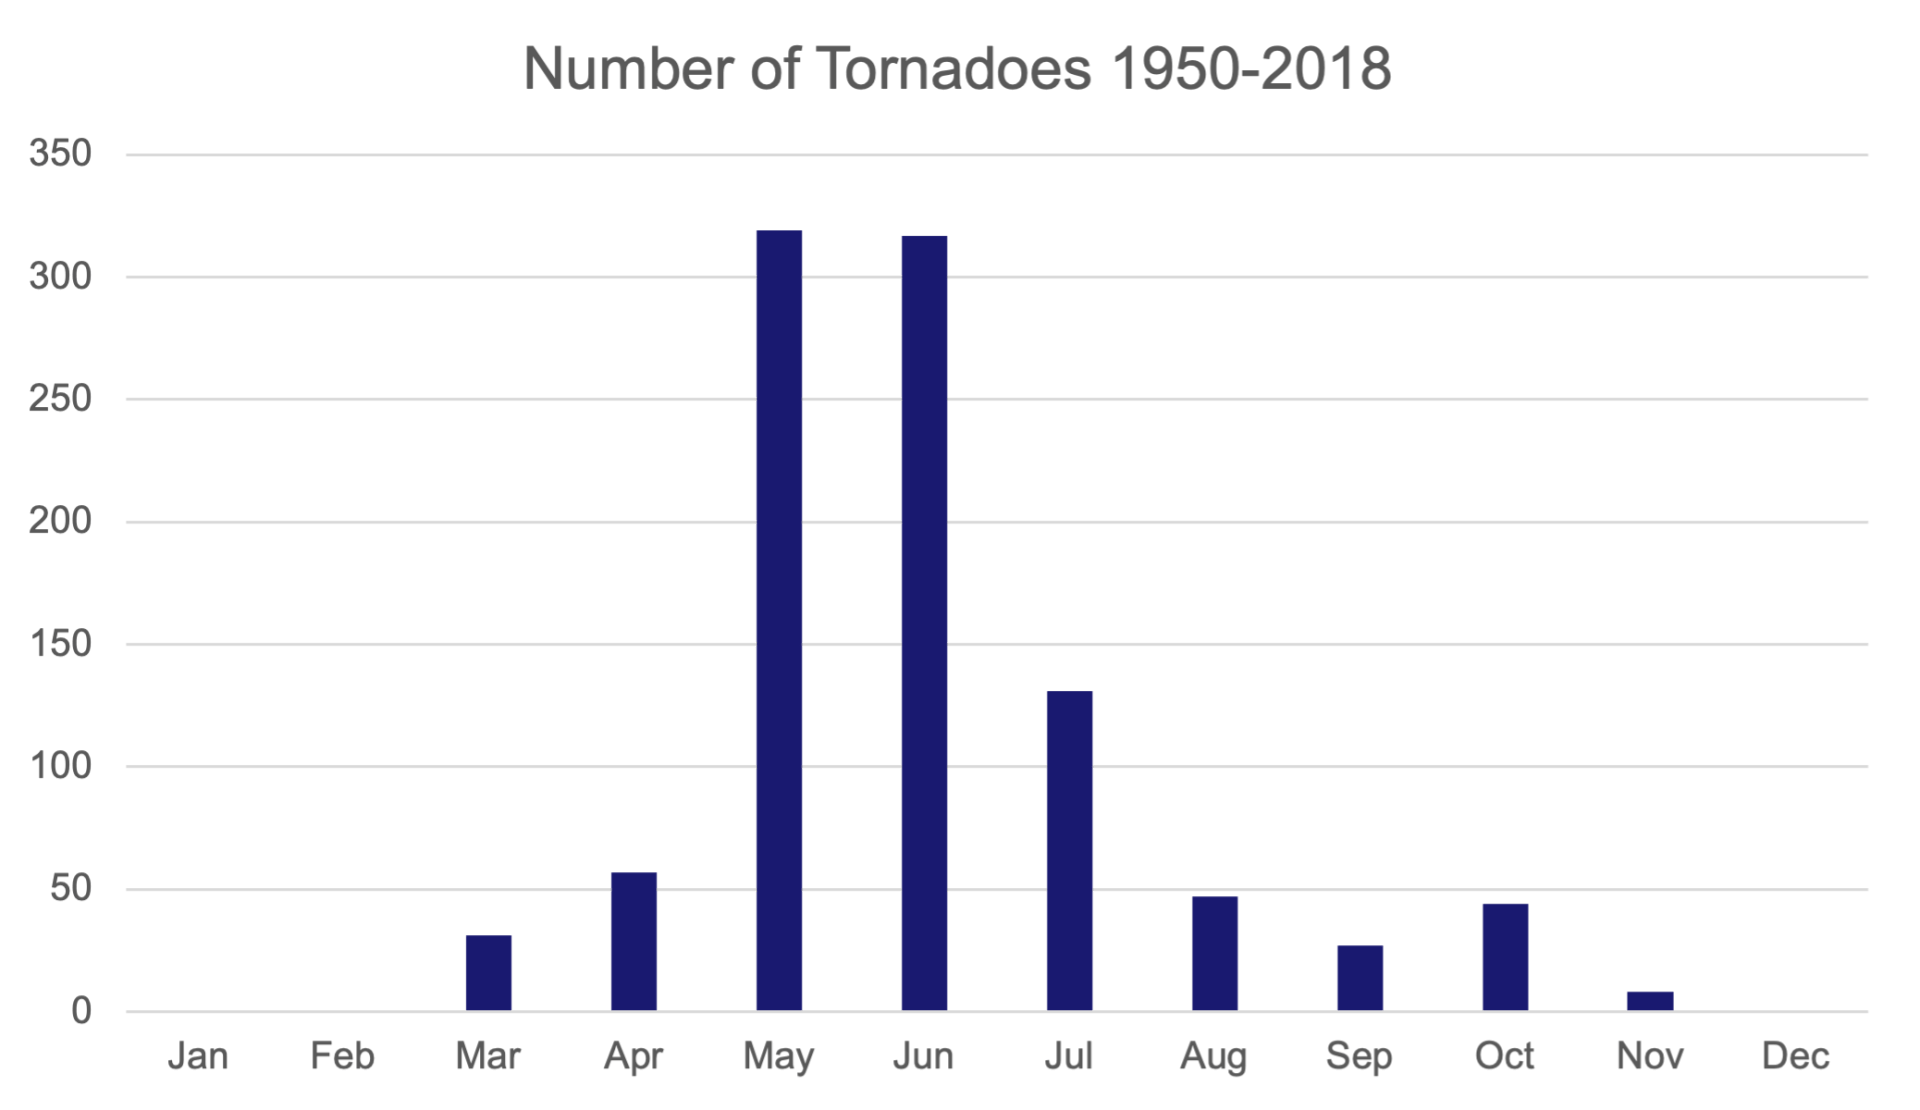 Chart showing the number of tornadoes from 1950-2018 by month.